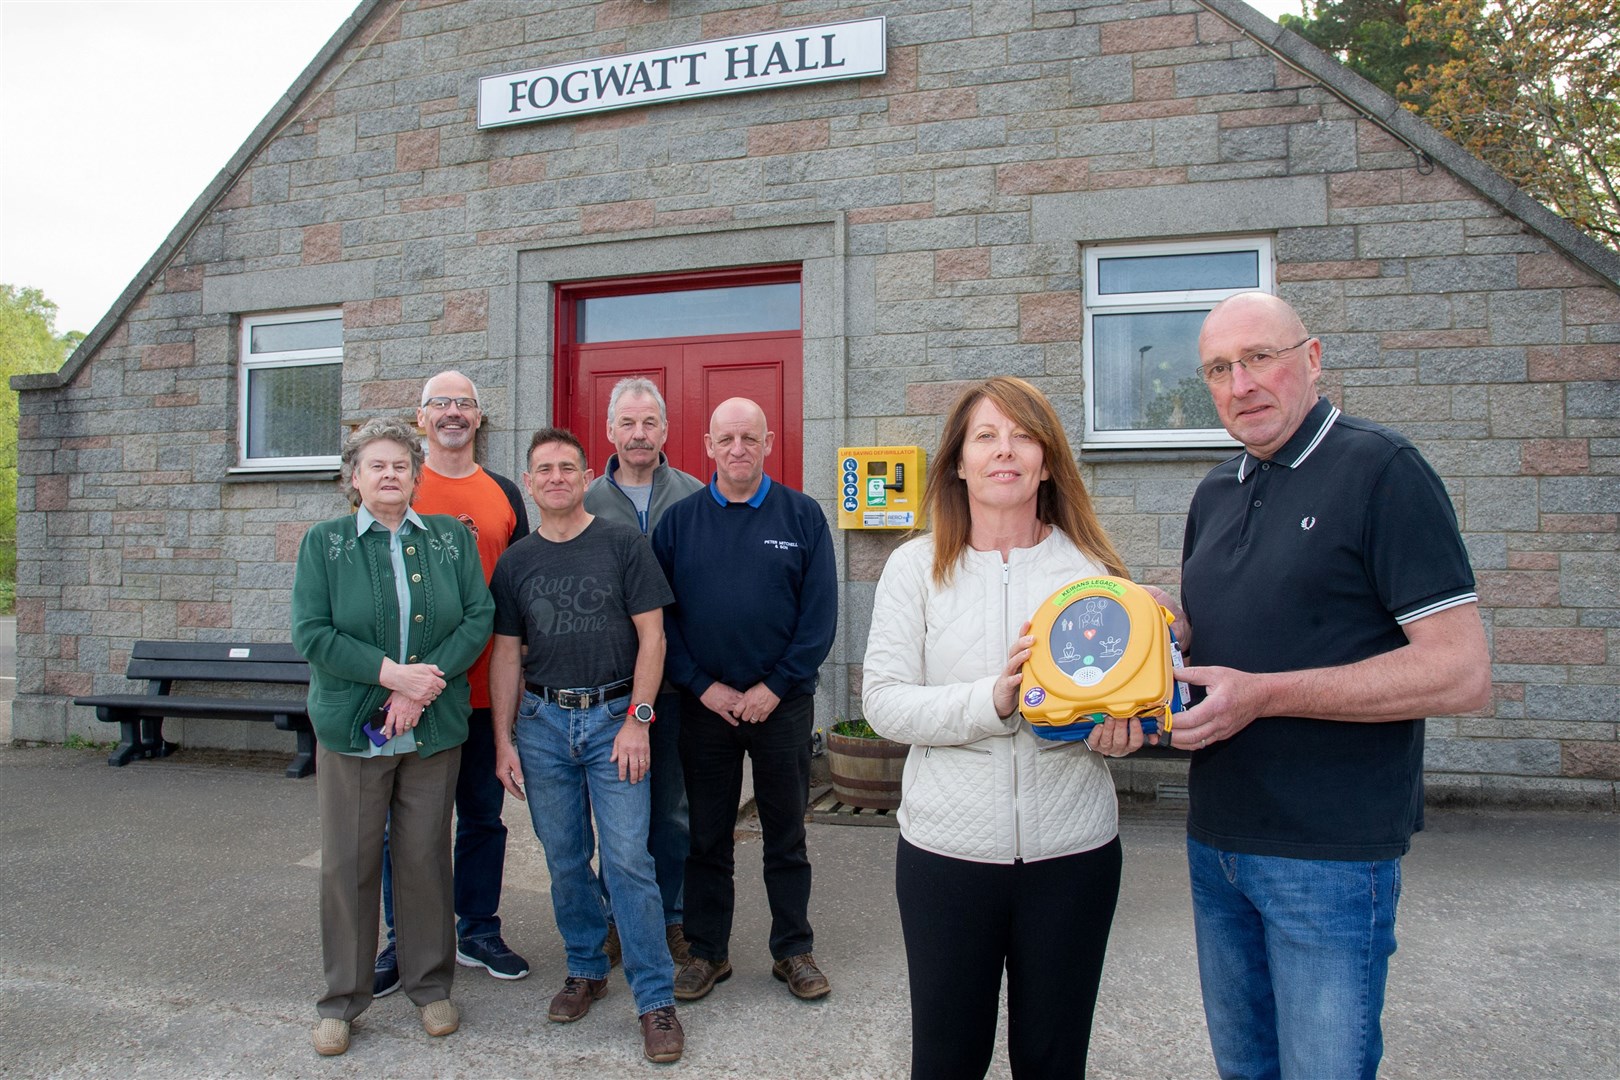 With the new defibrillator outside Fogwatt Hall is Sandra McKandie, who established Keiran’s Legacy in memory of her son, and Hamish Christie from the Fogwatt Hall committee along with other committee members. Picture: Daniel Forsyth. Image No. 043810.